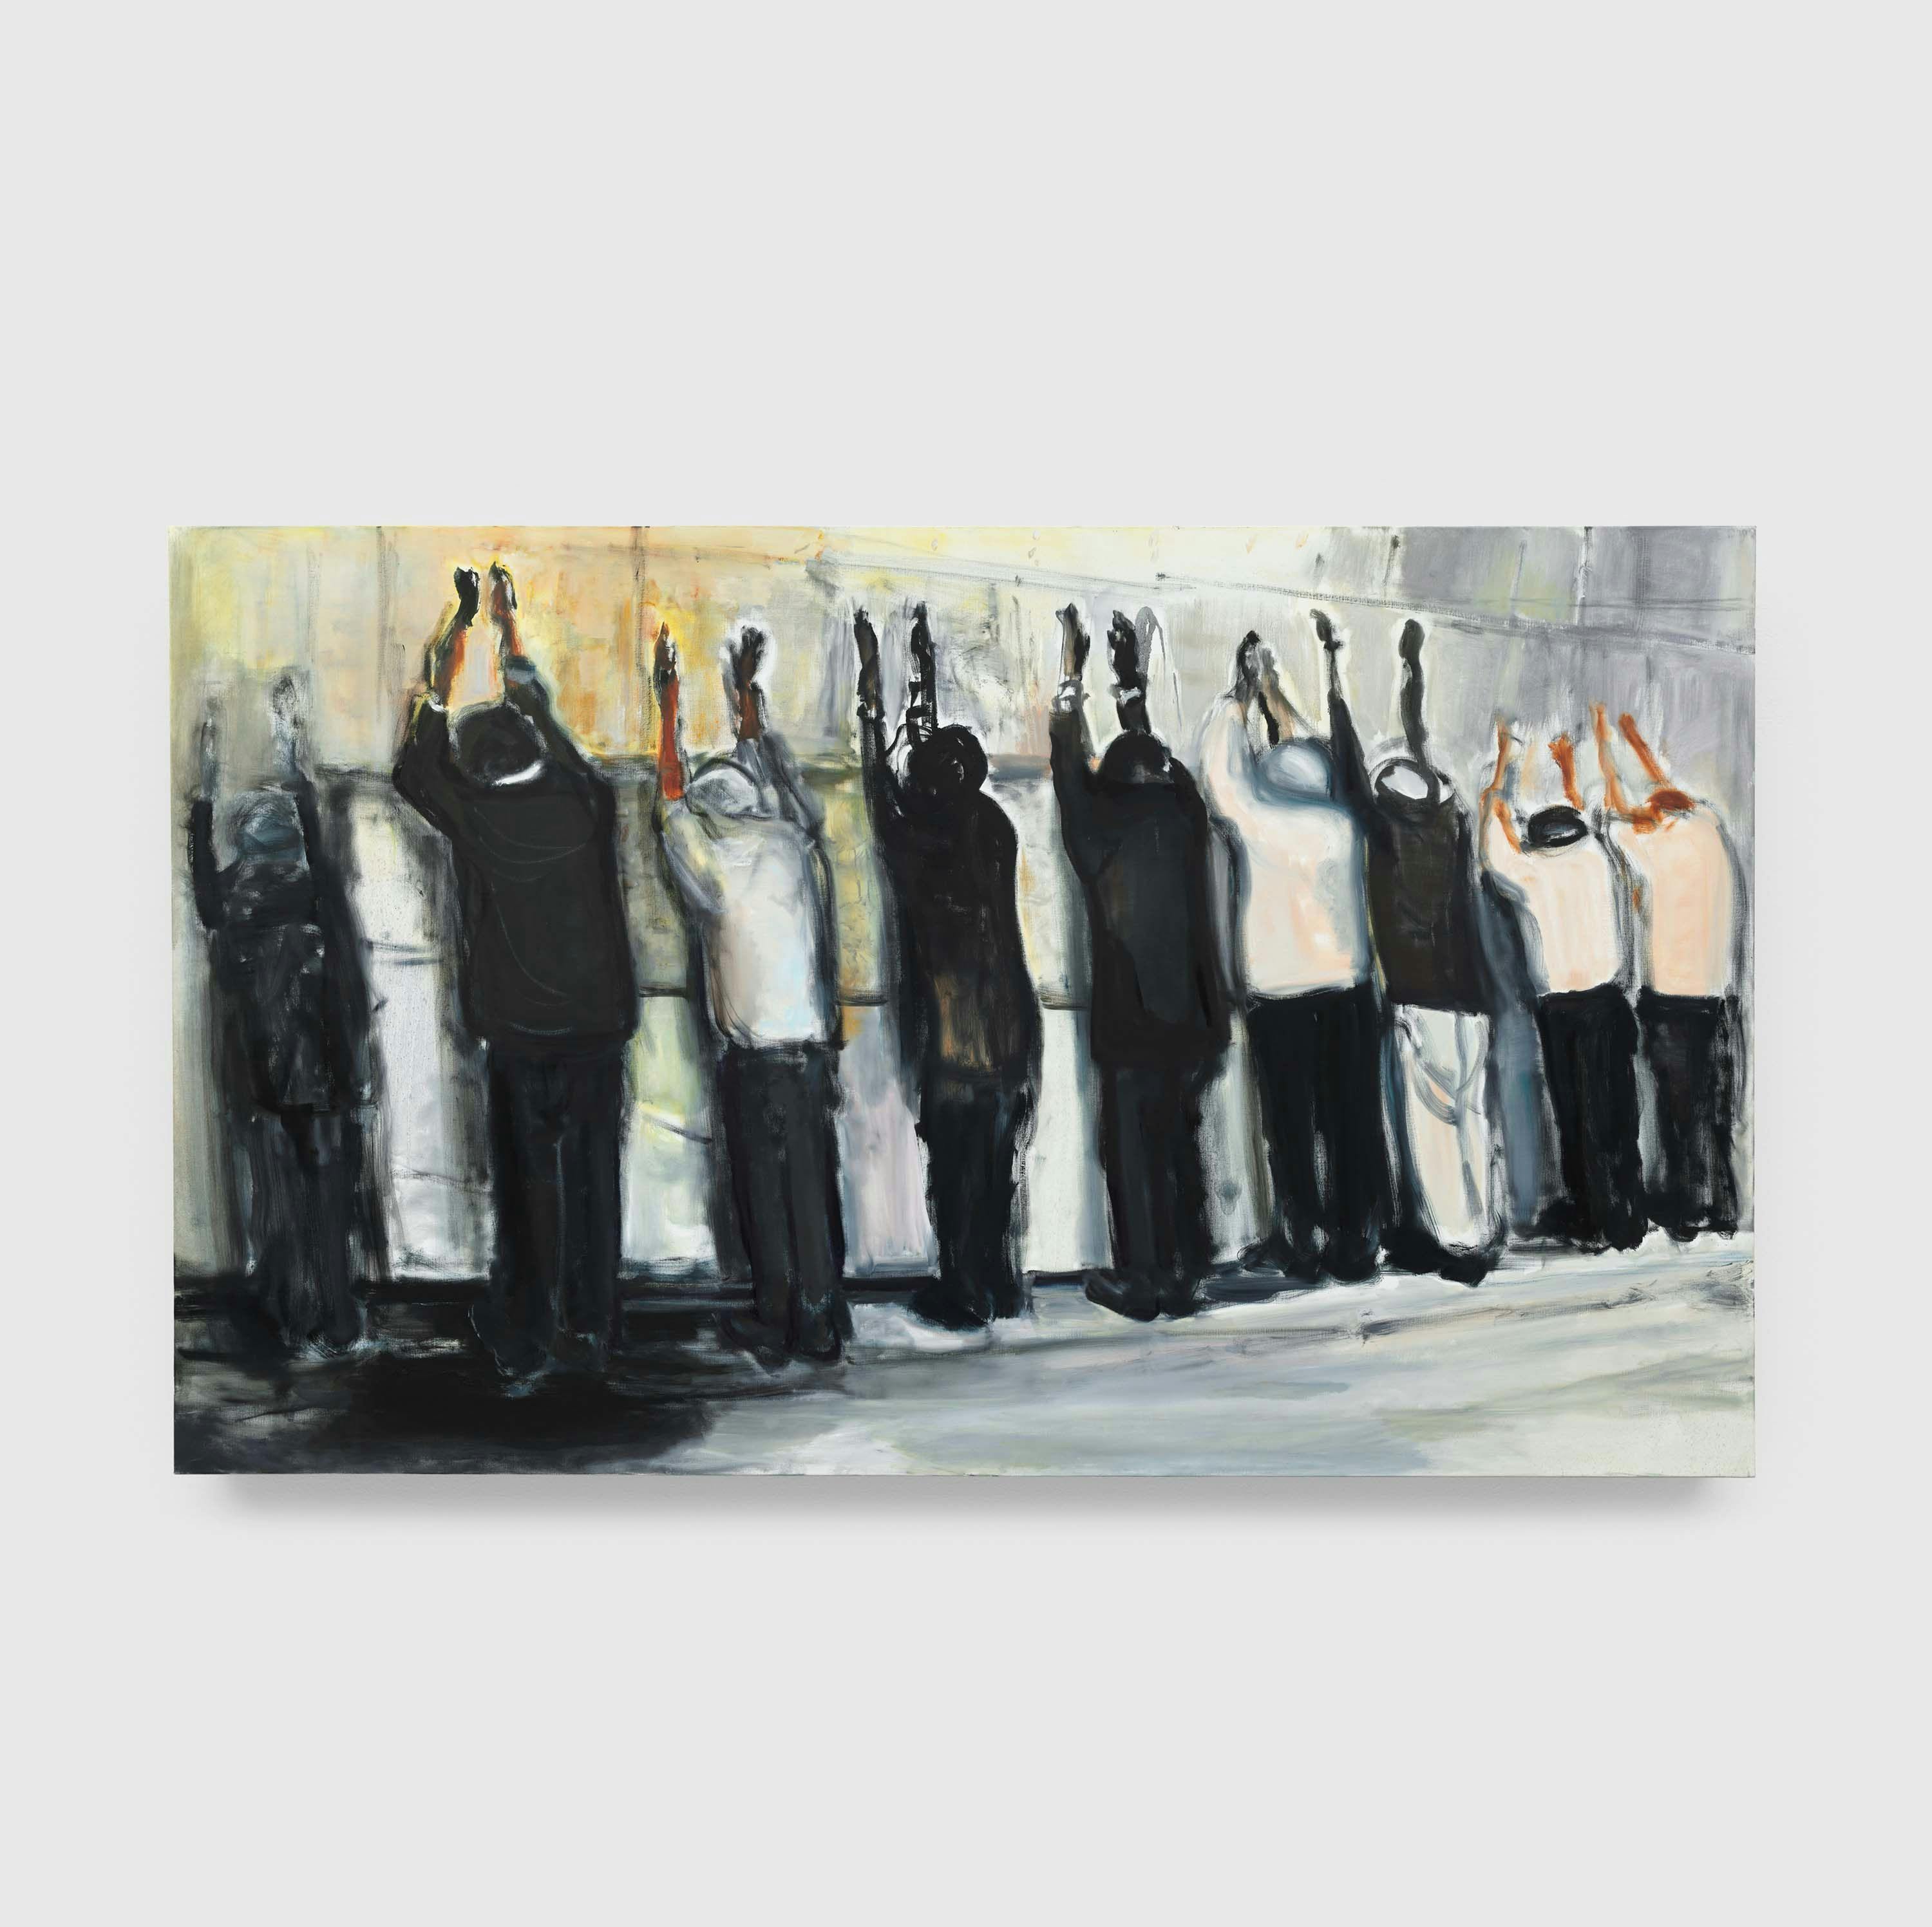 A painting by Marlene Dumas, titled Wall Weeping, dated 2009.